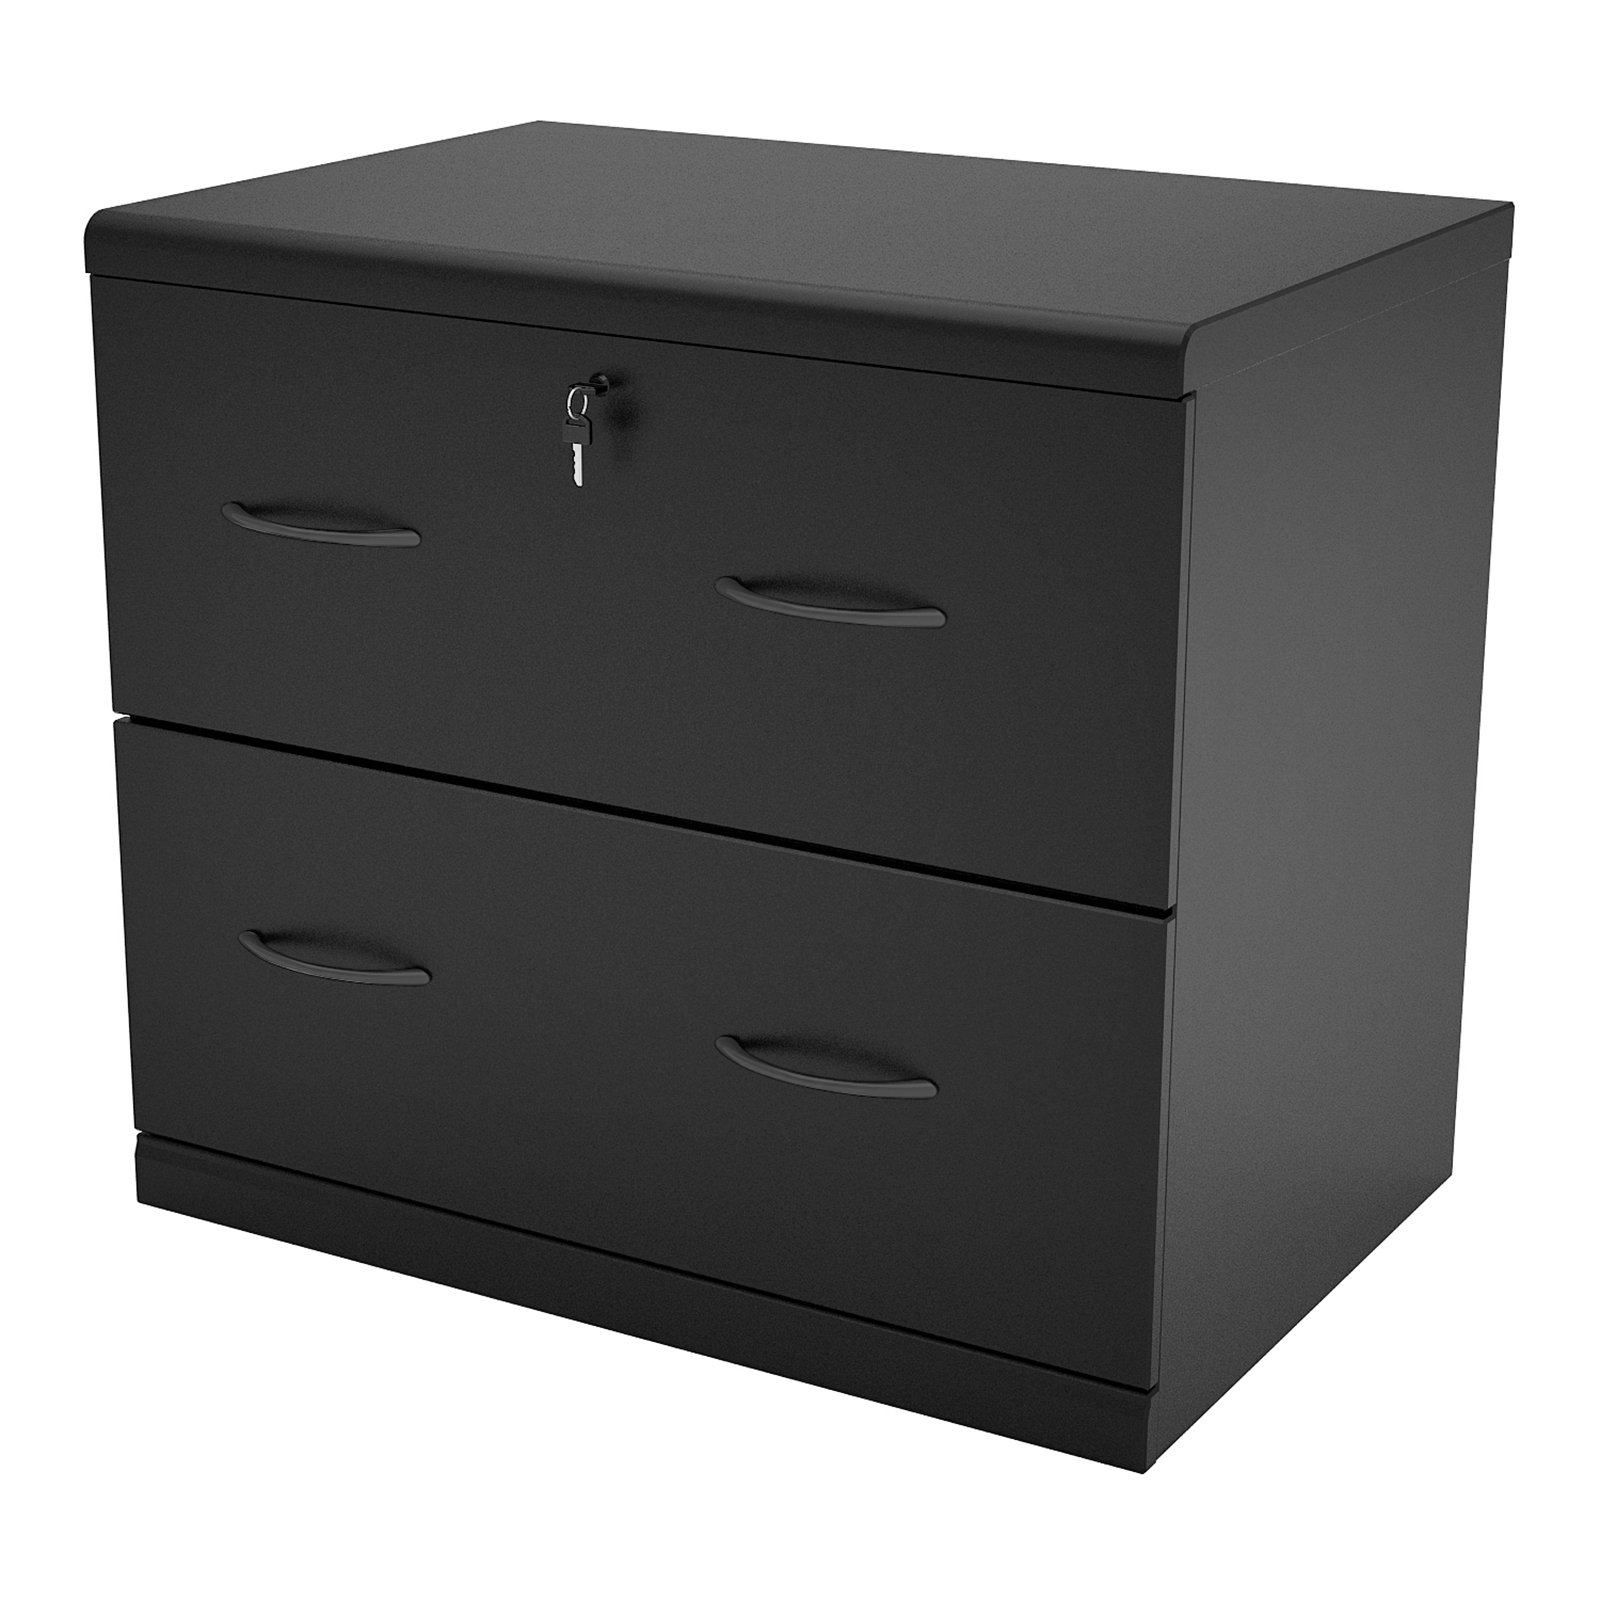 2 Drawer Lateral Wood Lockable Filing Cabinet Black Walmart throughout dimensions 1600 X 1600